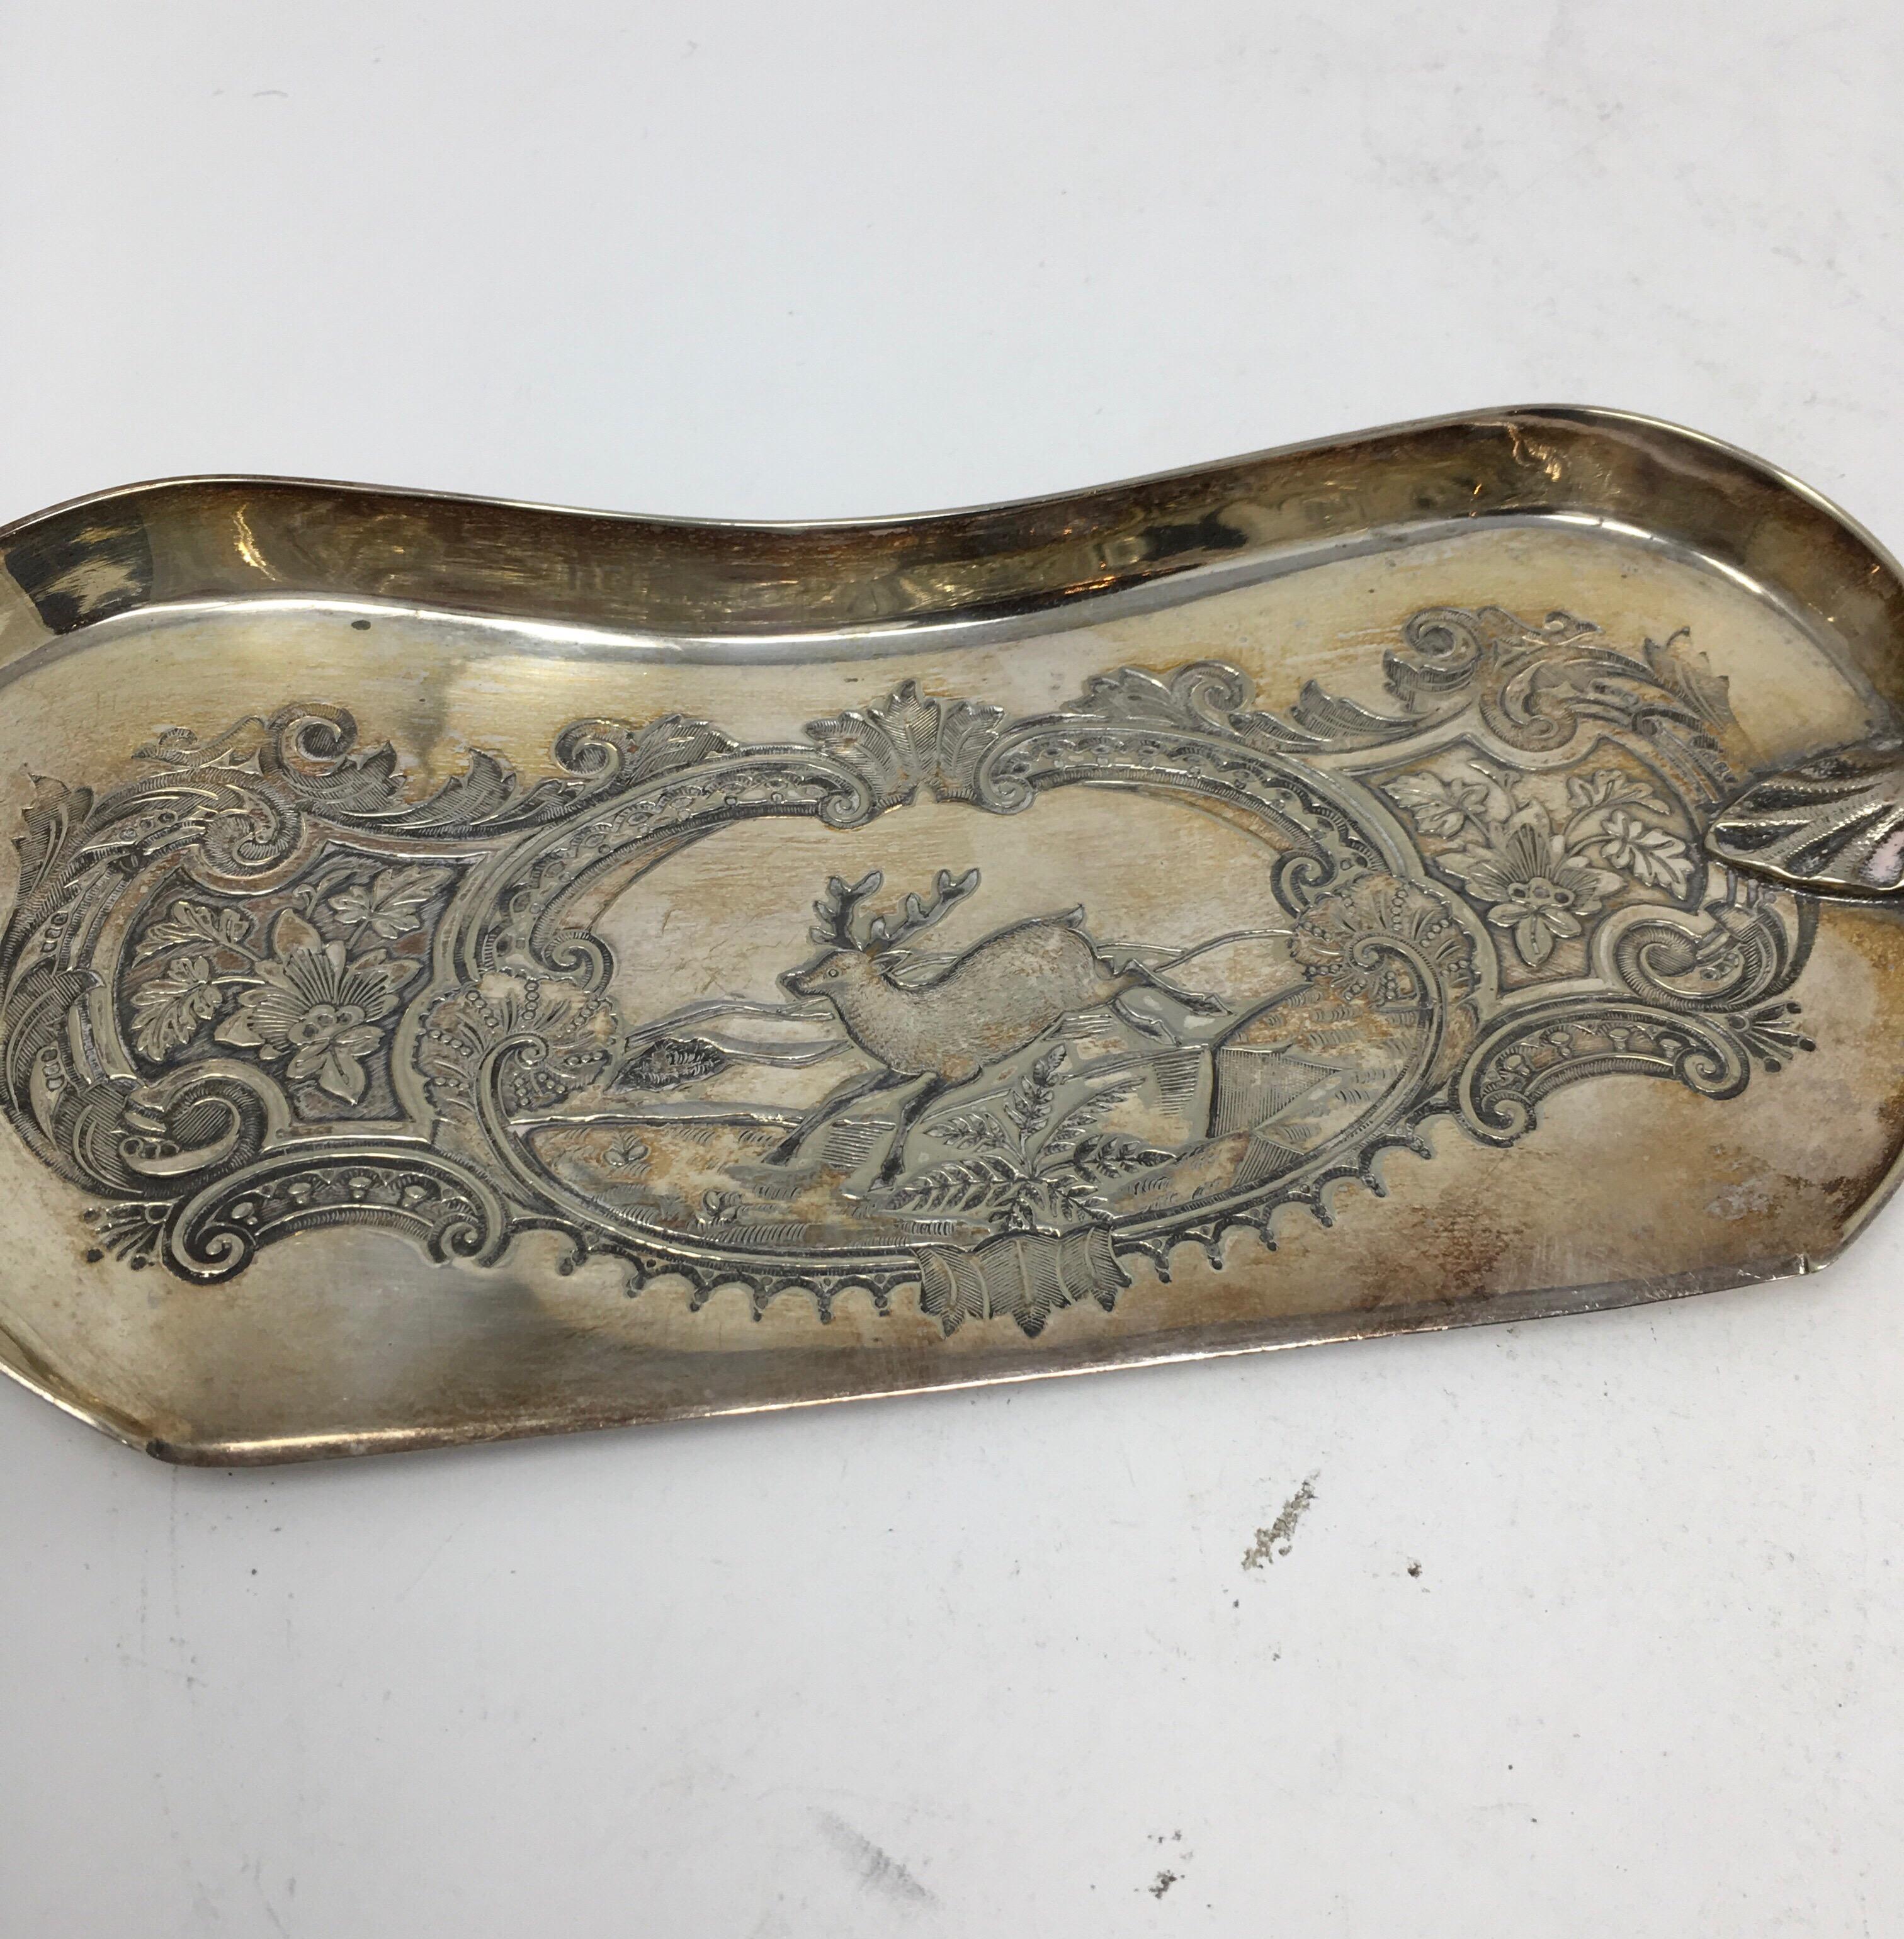 This is an antique silver plate crumber with hallmarks featuring a stags horn handle from England. The silver plate blade is very decorative, beautifully engraved with a pictorial of a stag running in a field with a border of flowers and leaves.